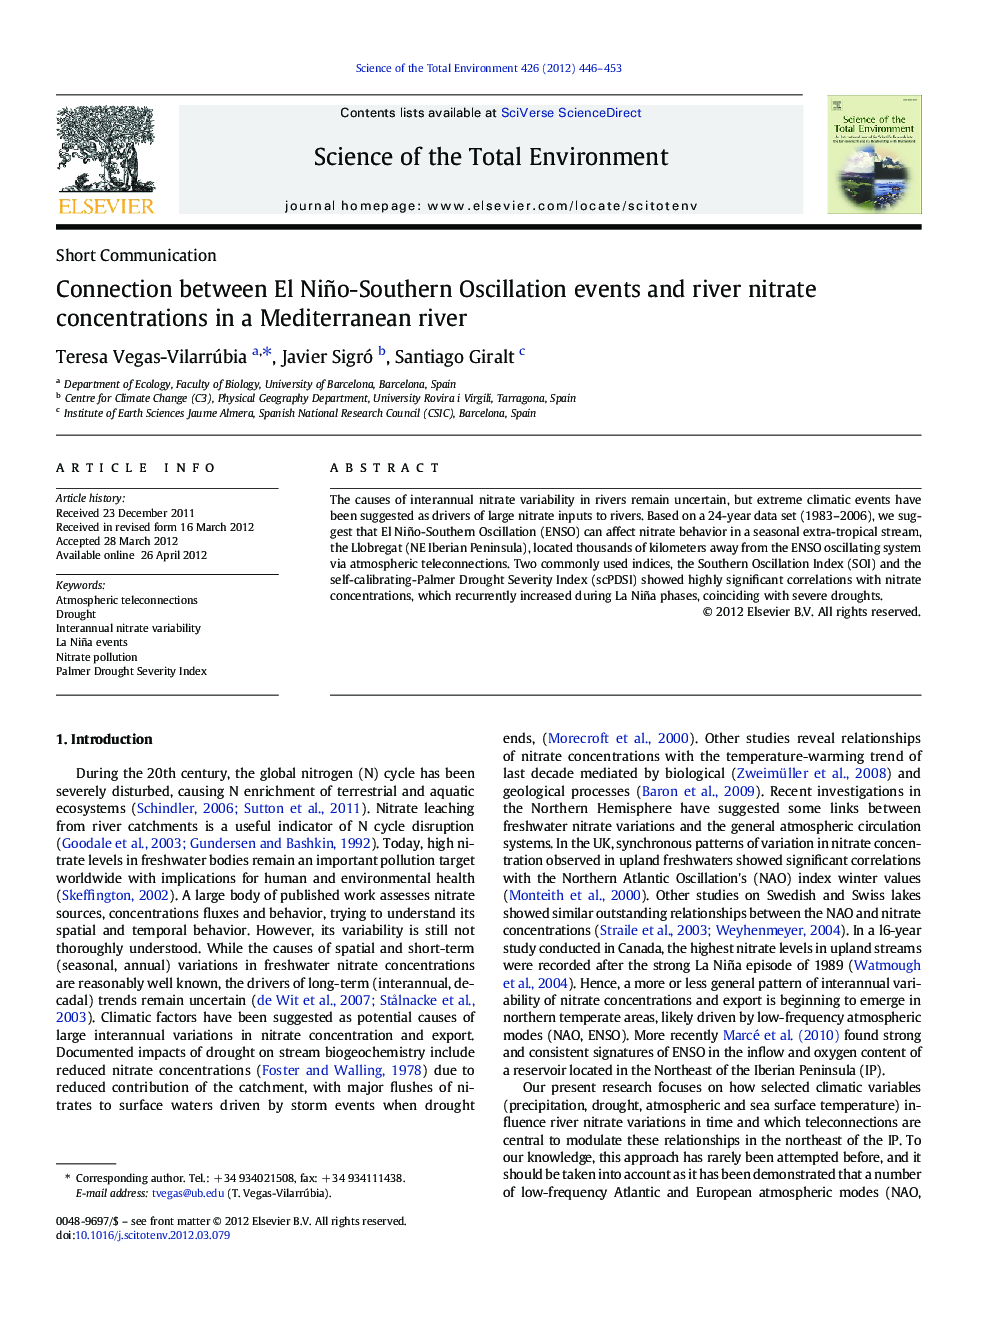 Connection between El Niño-Southern Oscillation events and river nitrate concentrations in a Mediterranean river